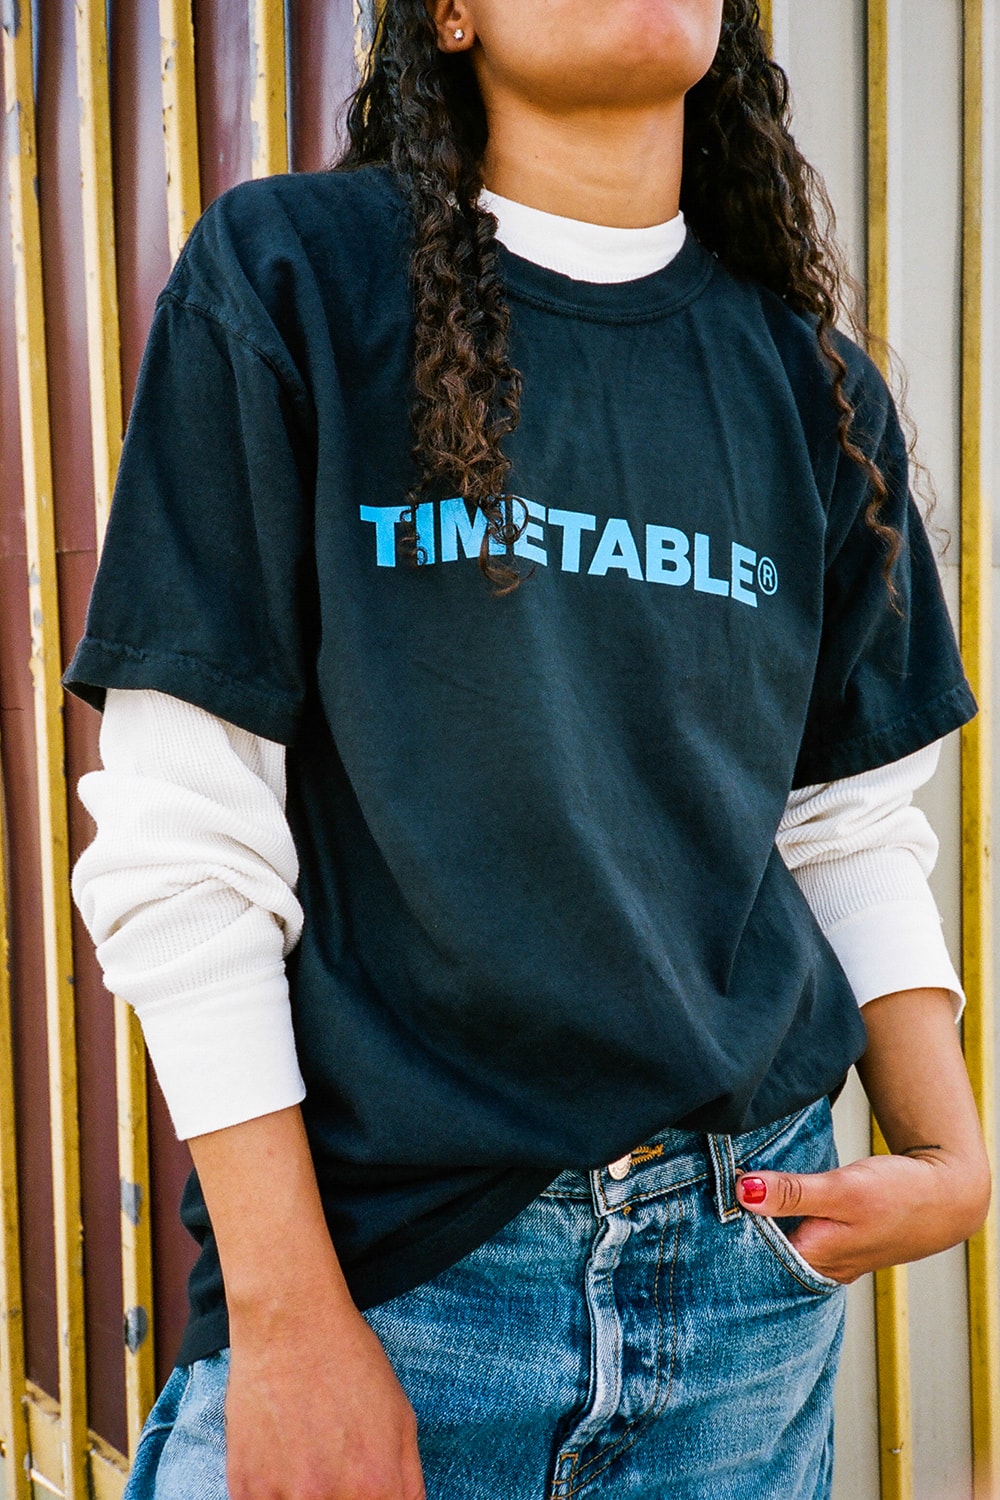 Timetable Records Clothing Collection Lookbook Images